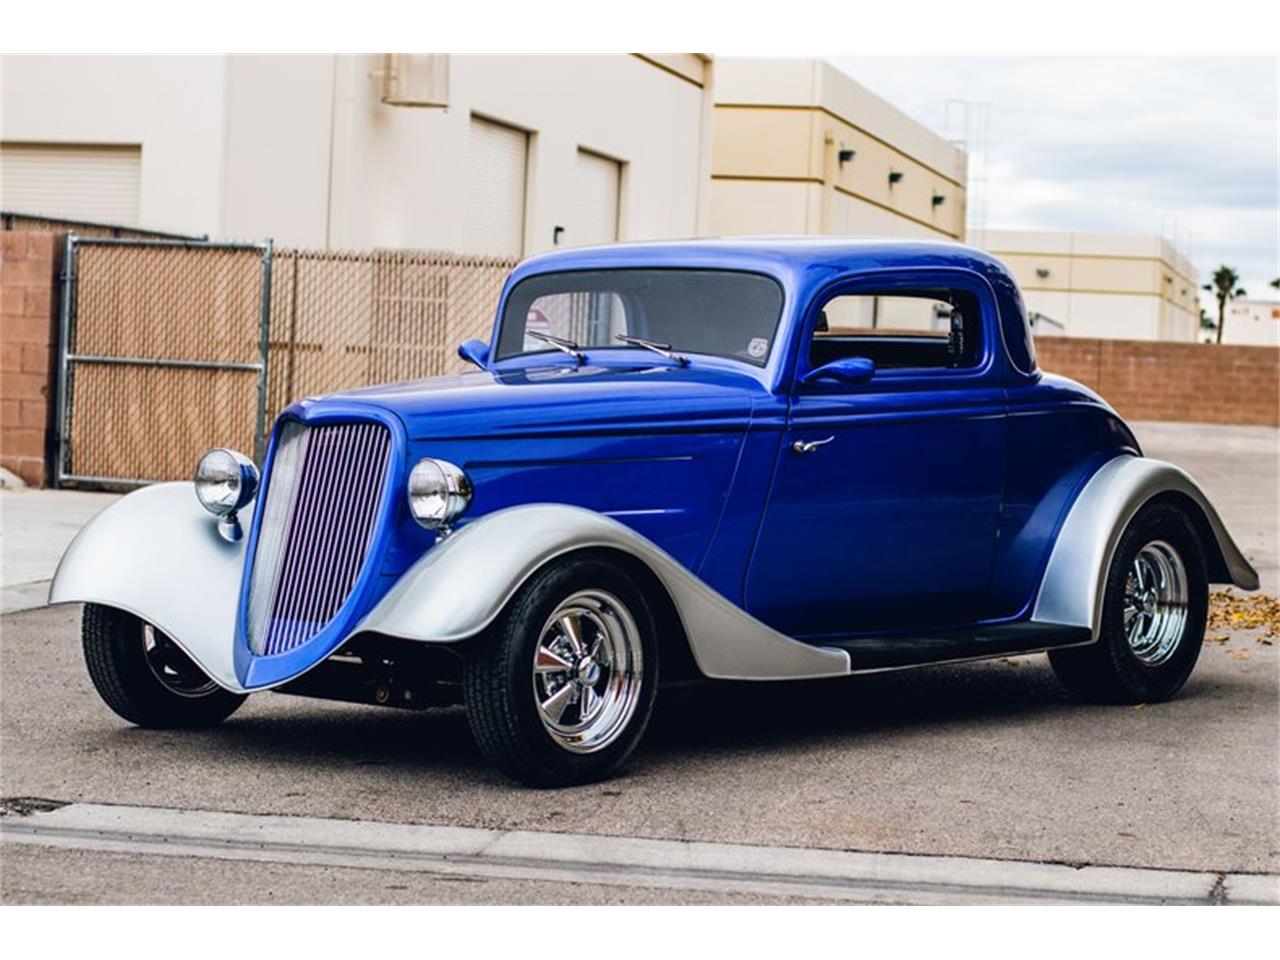 For Sale: 1934 Ford Coupe in Las Vegas, Nevada for sale in Las Vegas, NV